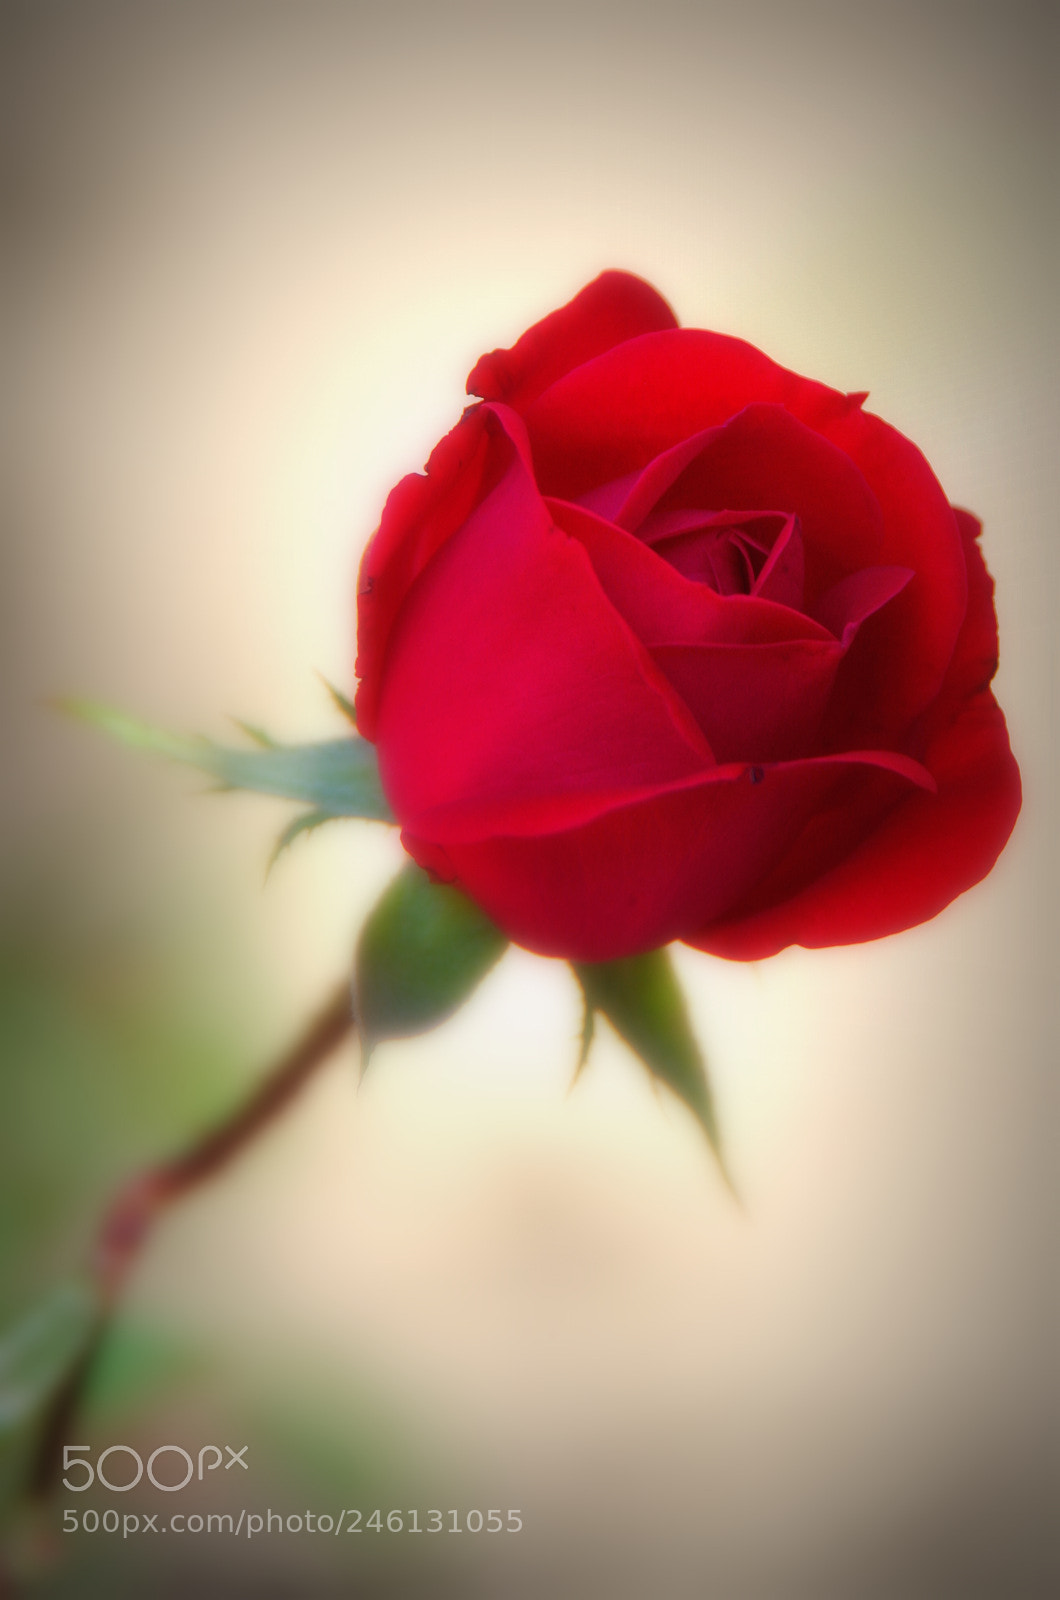 Pentax K-3 sample photo. A.... rose for you photography